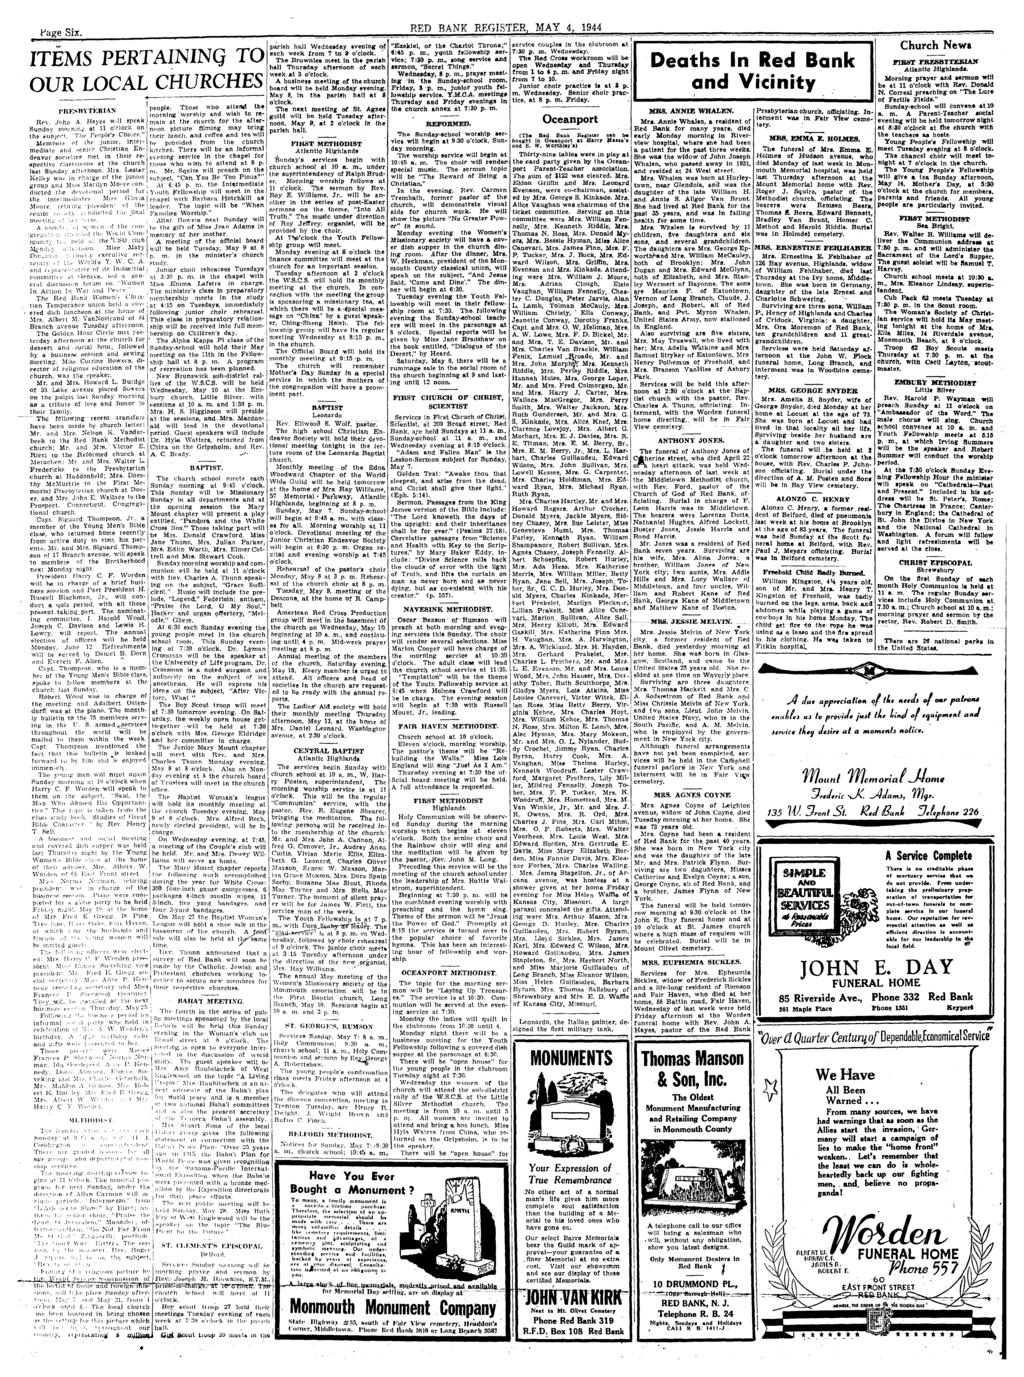 Page Six. RED BANK REGSTER, MAY 4, 1944 TEMS PERTANNQ TO OUR LOCAL CHURCHES RESBYTKBAX Rev. Jon A. Hayes will speak Sunday mnrnir,,; at 11 oclock on tile subject, Te Peoples Coice 1." people.